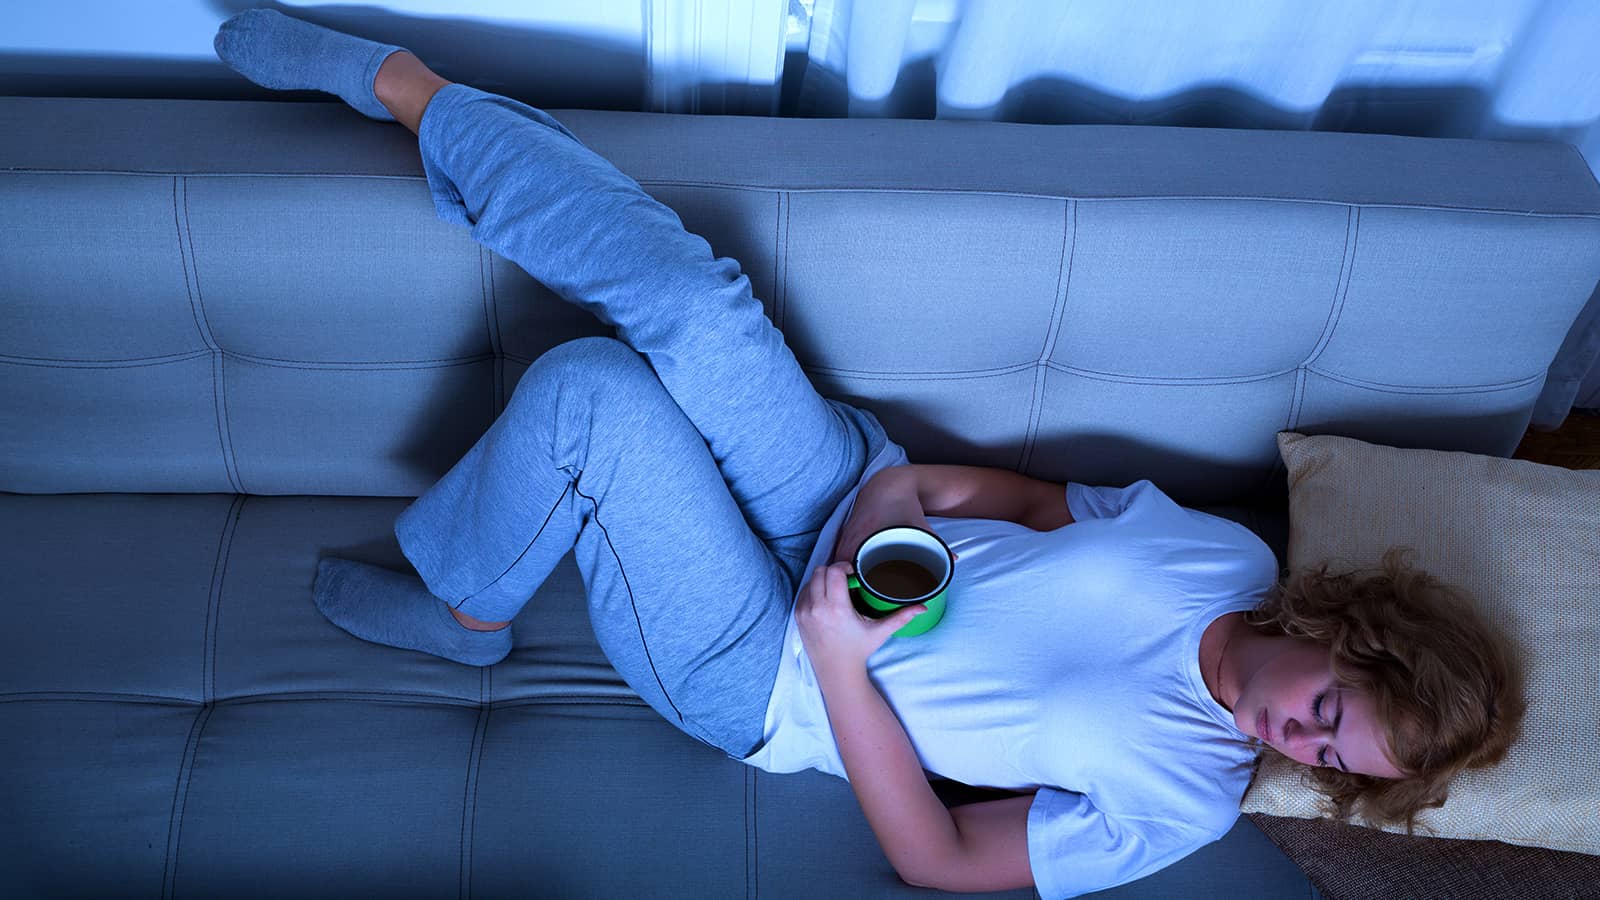 20 Reasons to Be Lazy and Just Enjoy Life Once in a While